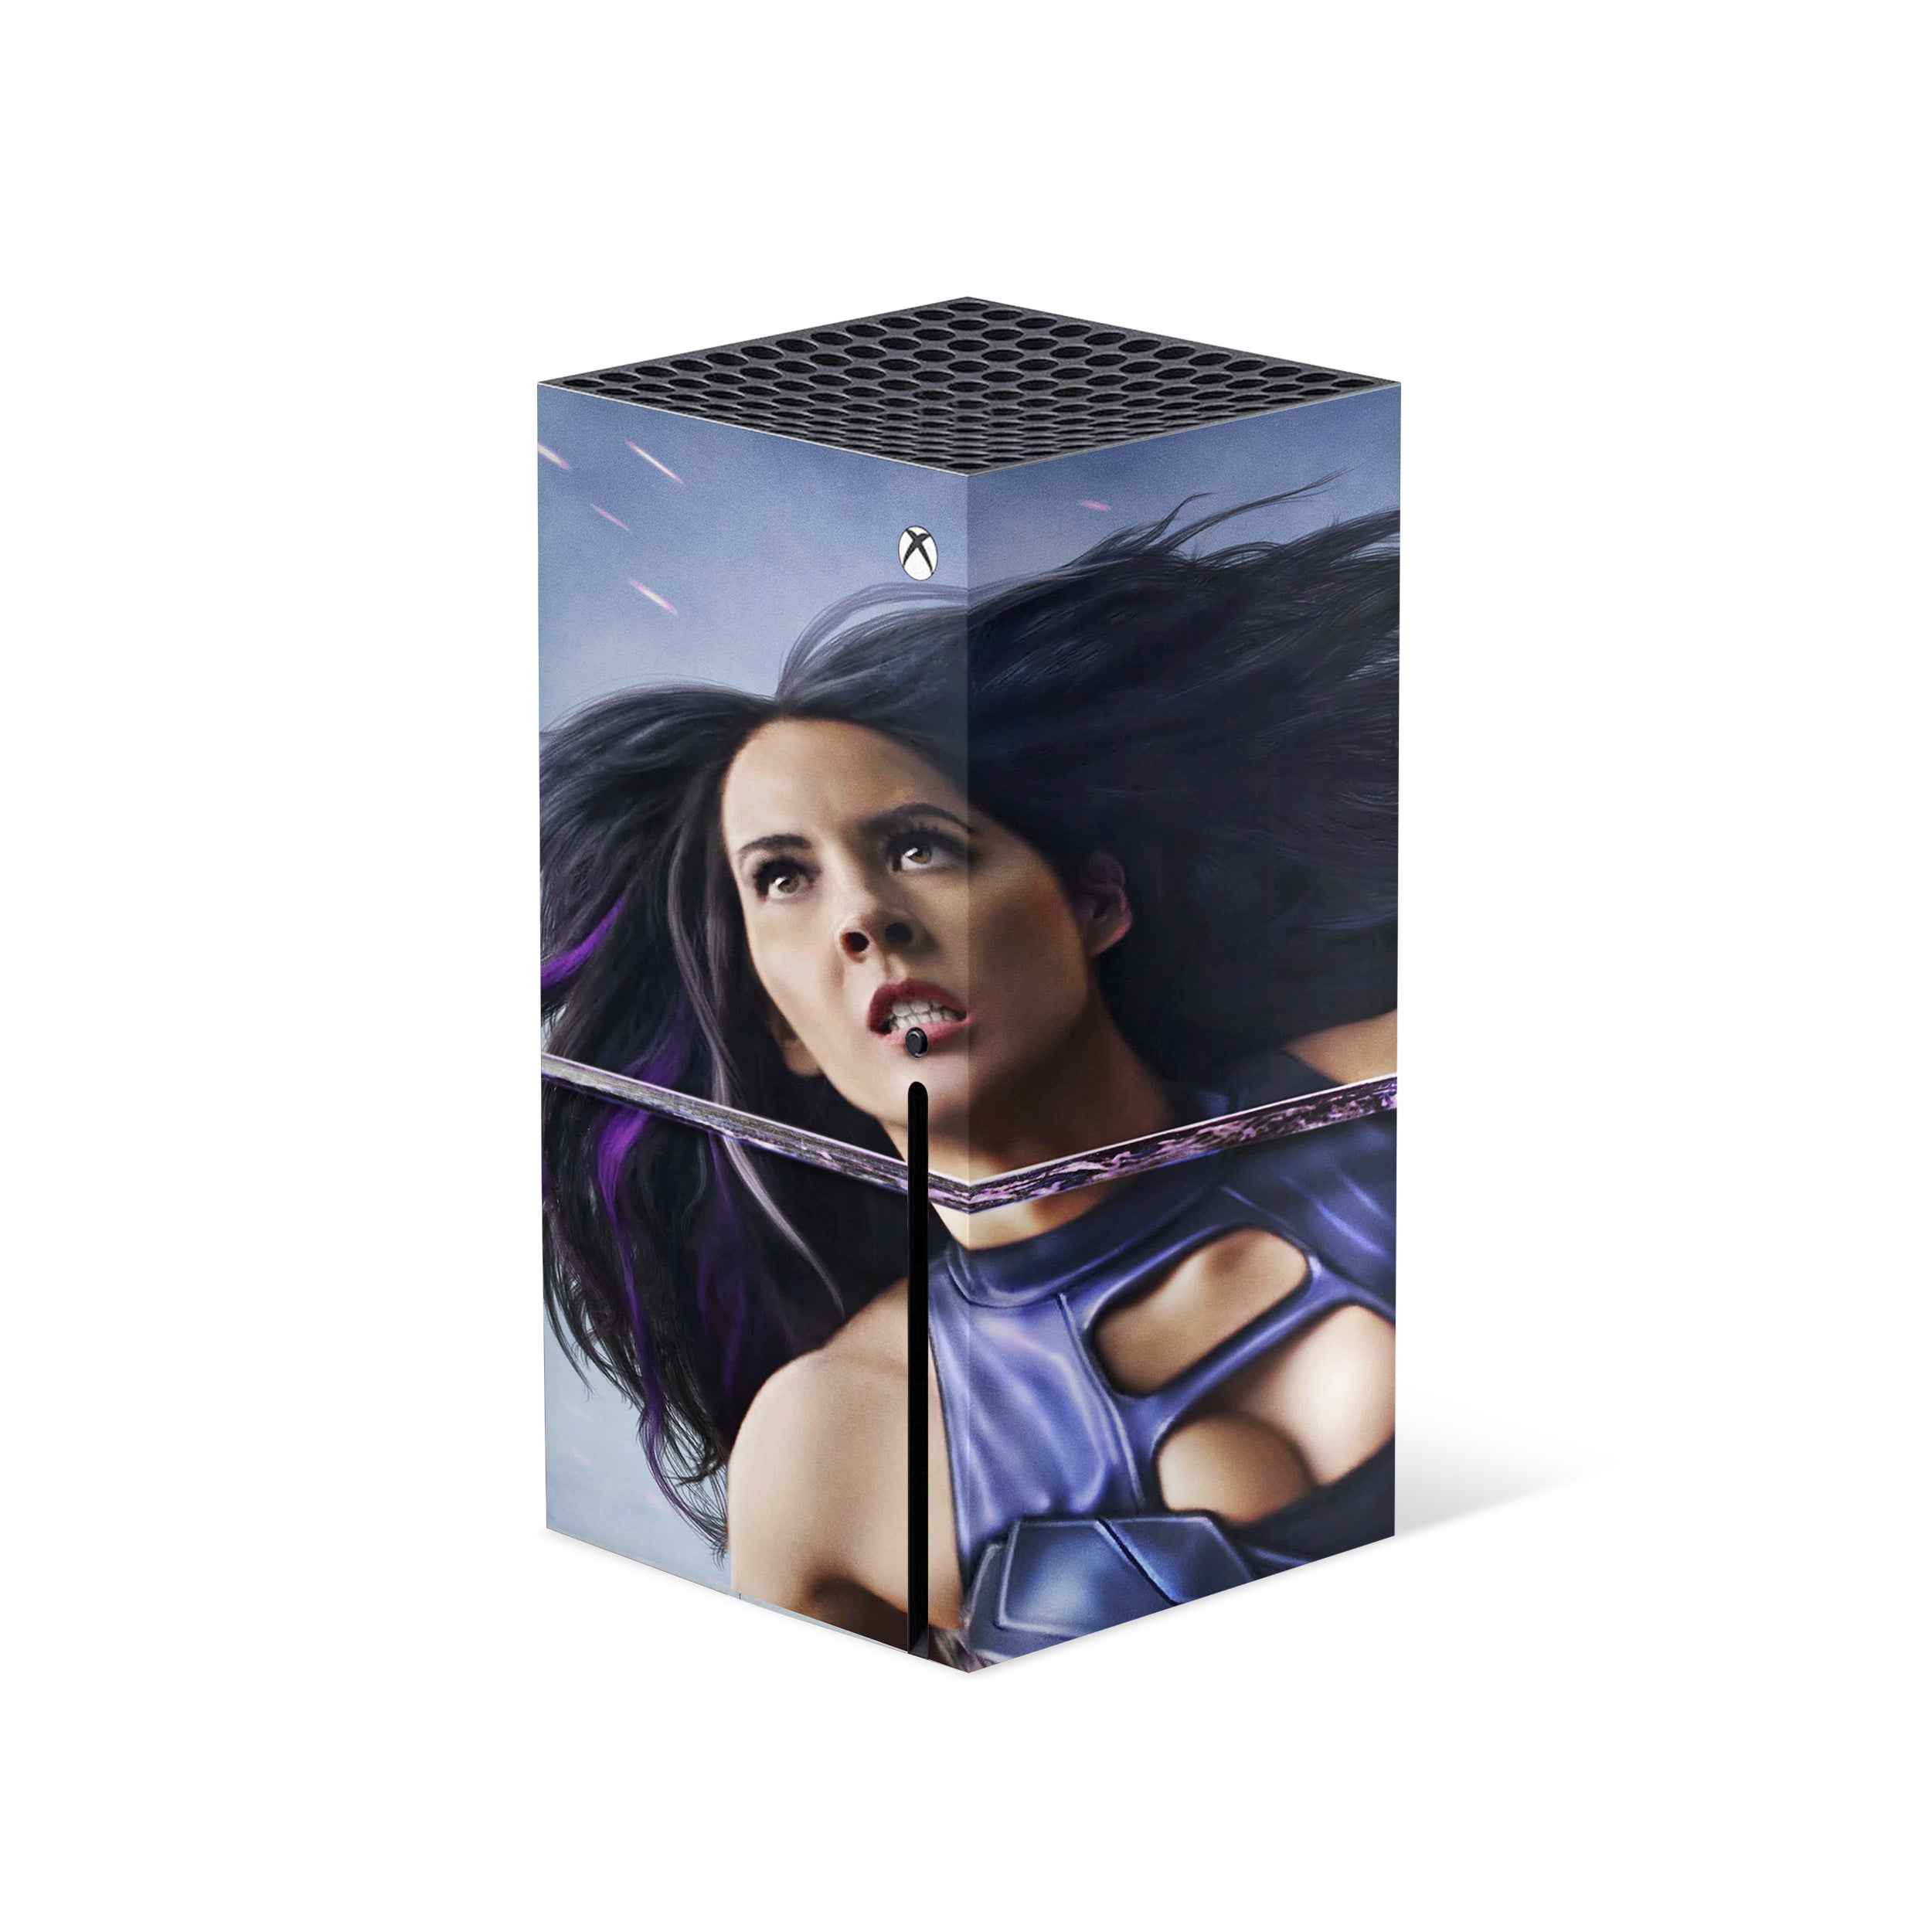 A video game skin featuring a Marvel X Men Psylocke design for the Xbox Series X.